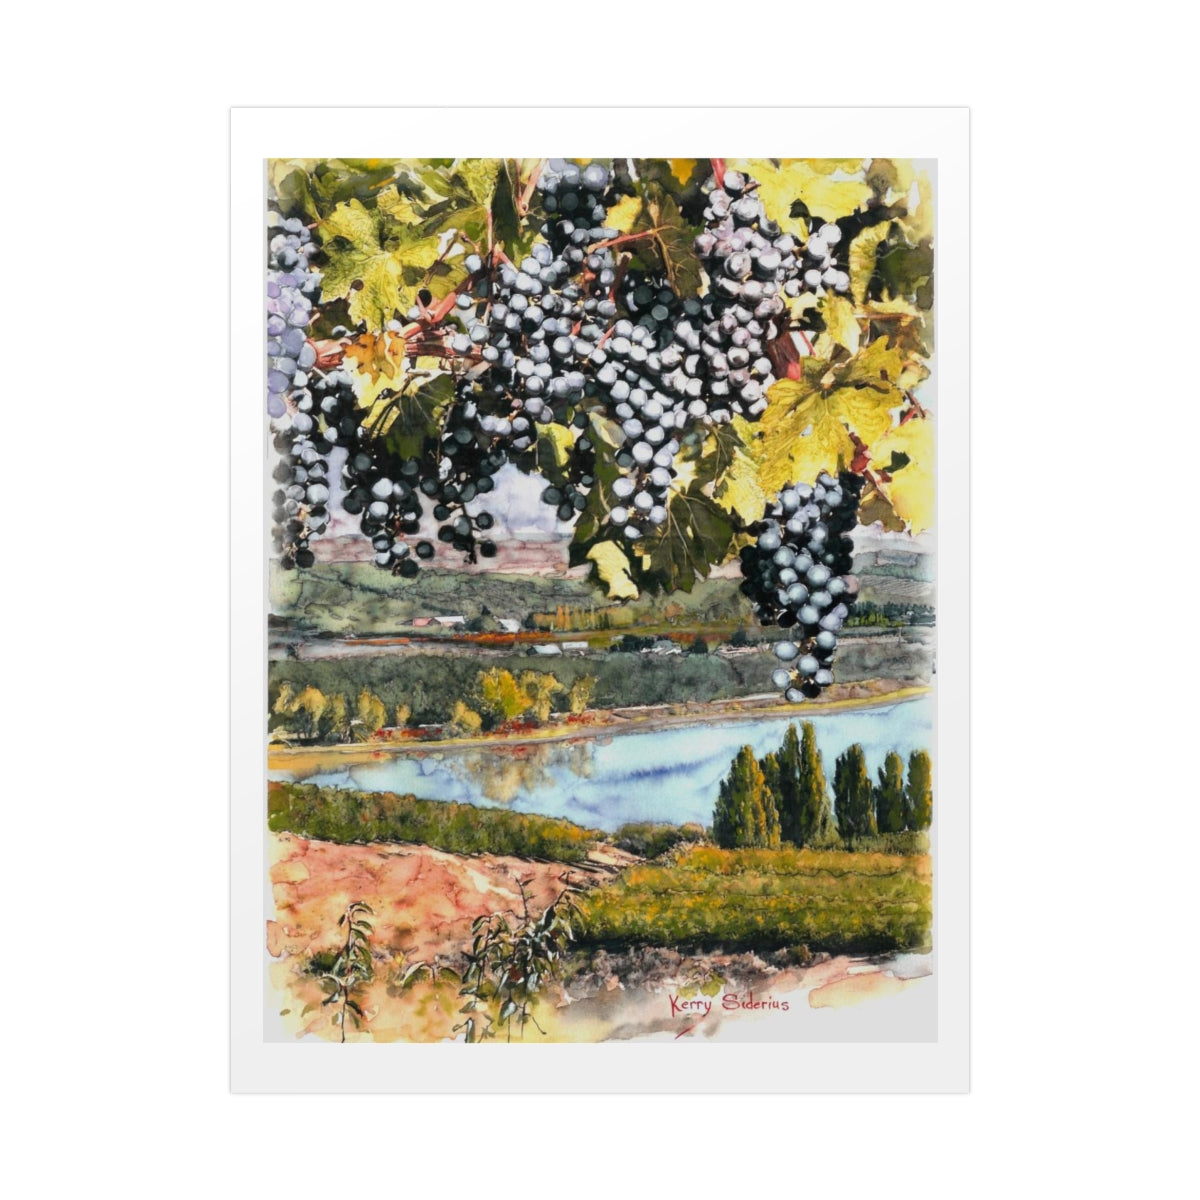 "Grapes Over the Columbia" Fine Quality Poster Print - Kerry Siderius Art 